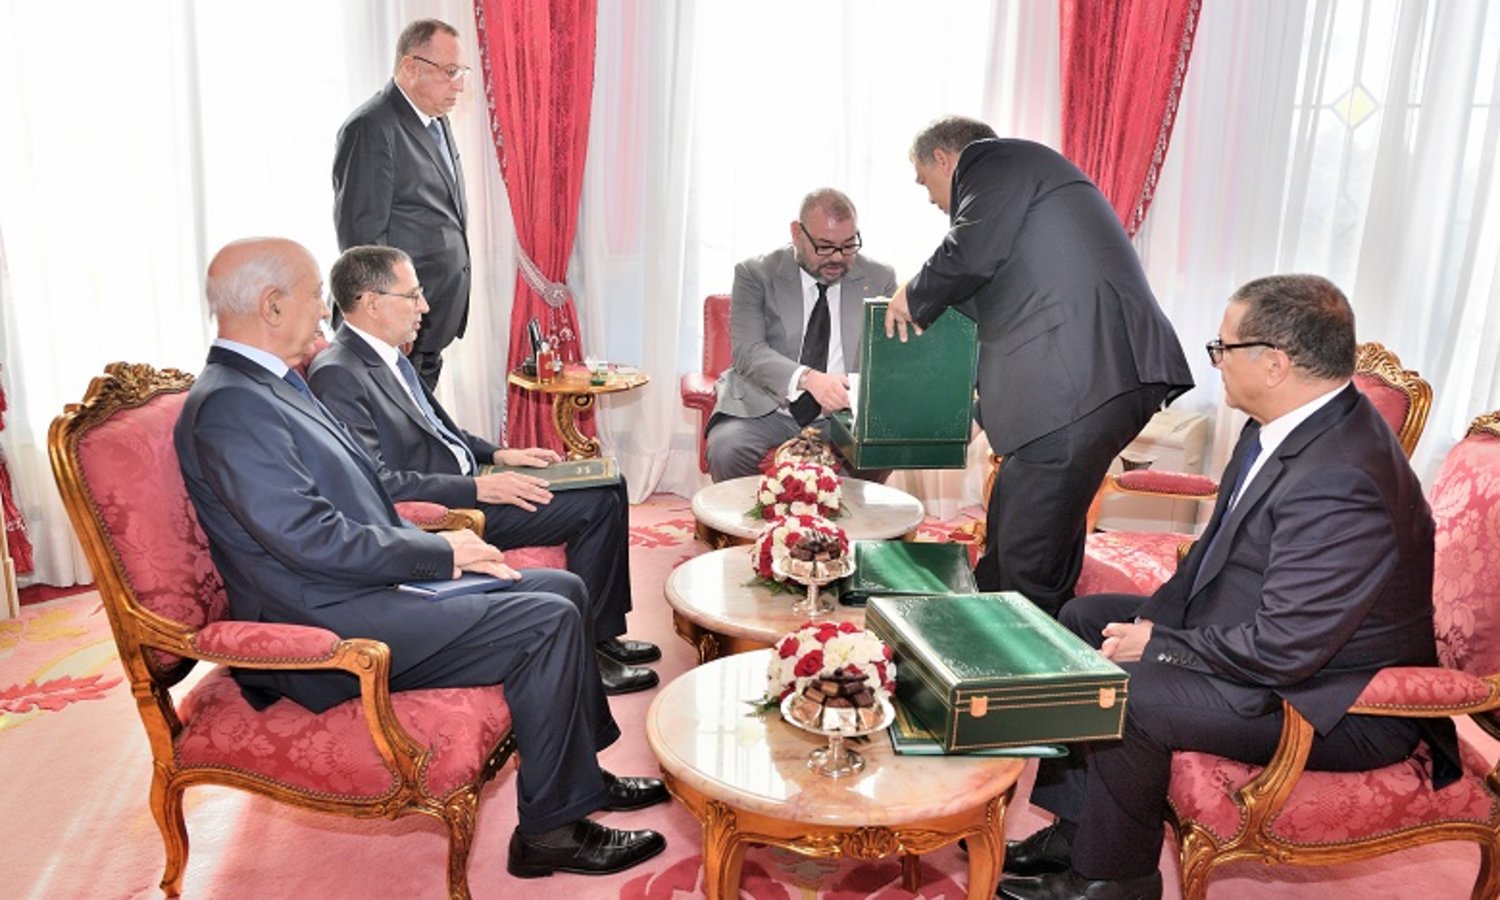  King Mohammed VI receives in Rabat Tuesday the first president of the Court of Auditors, Driss Jettou who presented a report containing the conclusions of the Court regarding the Al Hoceima projects “Manarat Almotawassit” /Moroccoworldnews